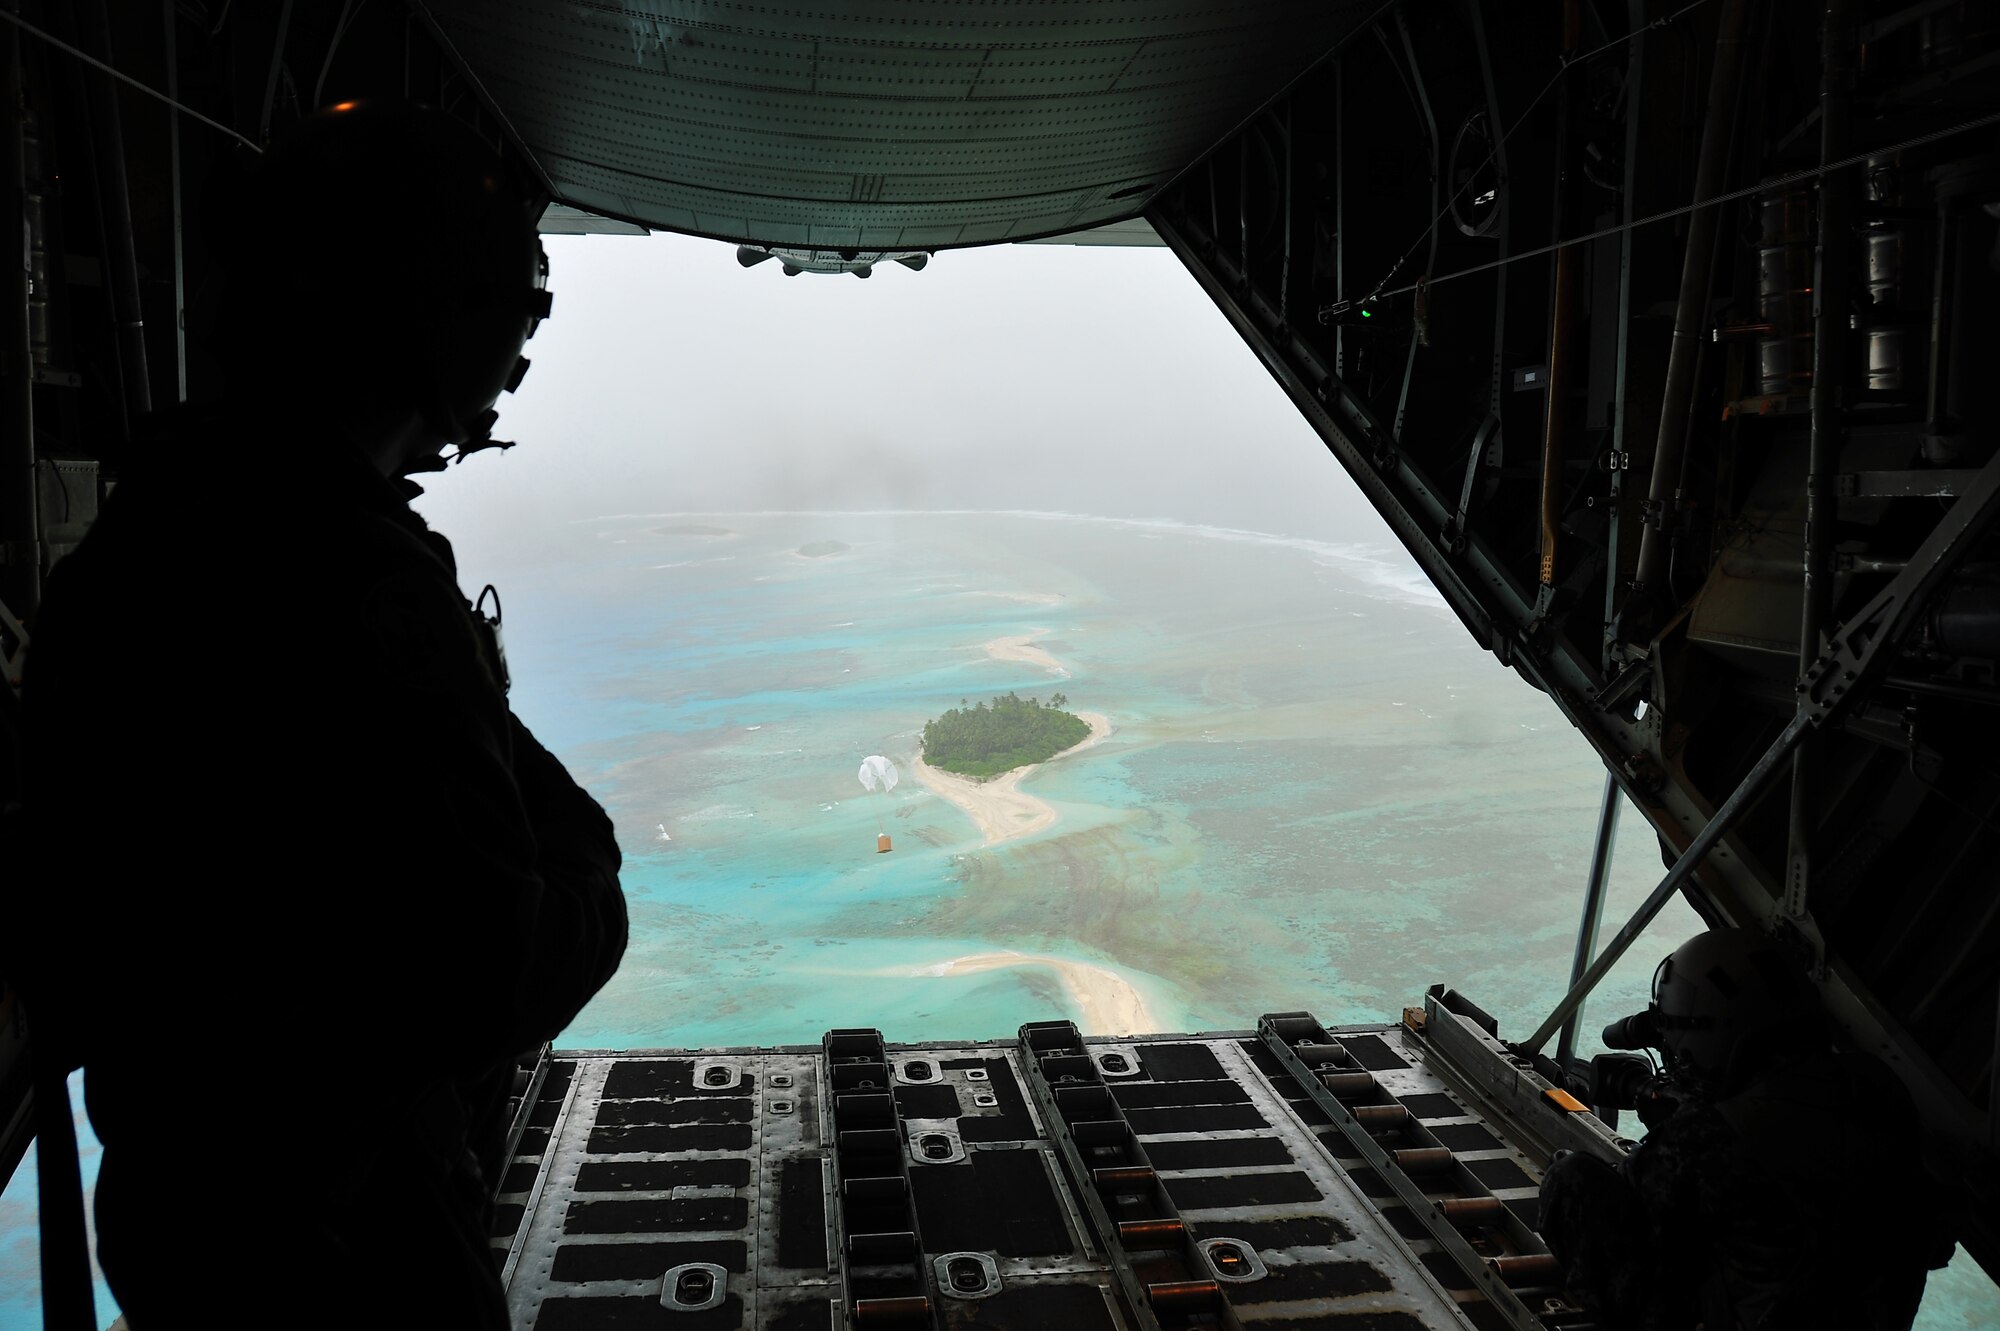 A bundle of donated goods drifts to an island after being dropped out the back of a C-130 Hercules Dec. 16, 2009, during Operation Christmas Drop.  The operation, the longest-running humanitarian airlift mission in the world, delivers supplies to remote islands of the Federated States of Micronesia. (U.S. Air Force photo/Tech. Sgt. Kimberly Spinner)